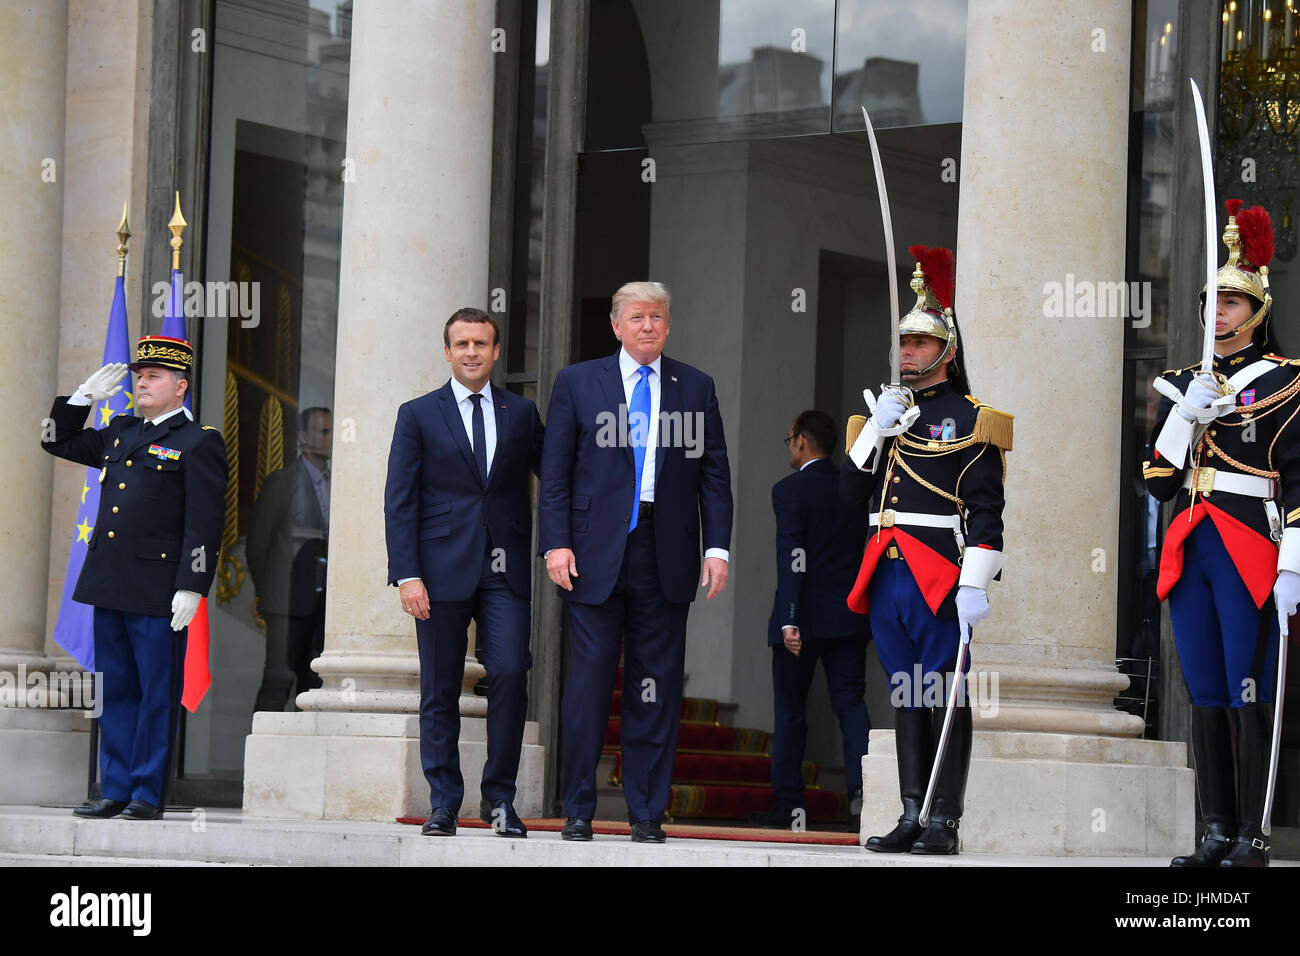 Paris, France. 13th July, 2017. US president Donald Trump arrives at the Elysee palace in Paris, France, on July 13, 2017. Credit: francois pauletto/Alamy Live News Stock Photo